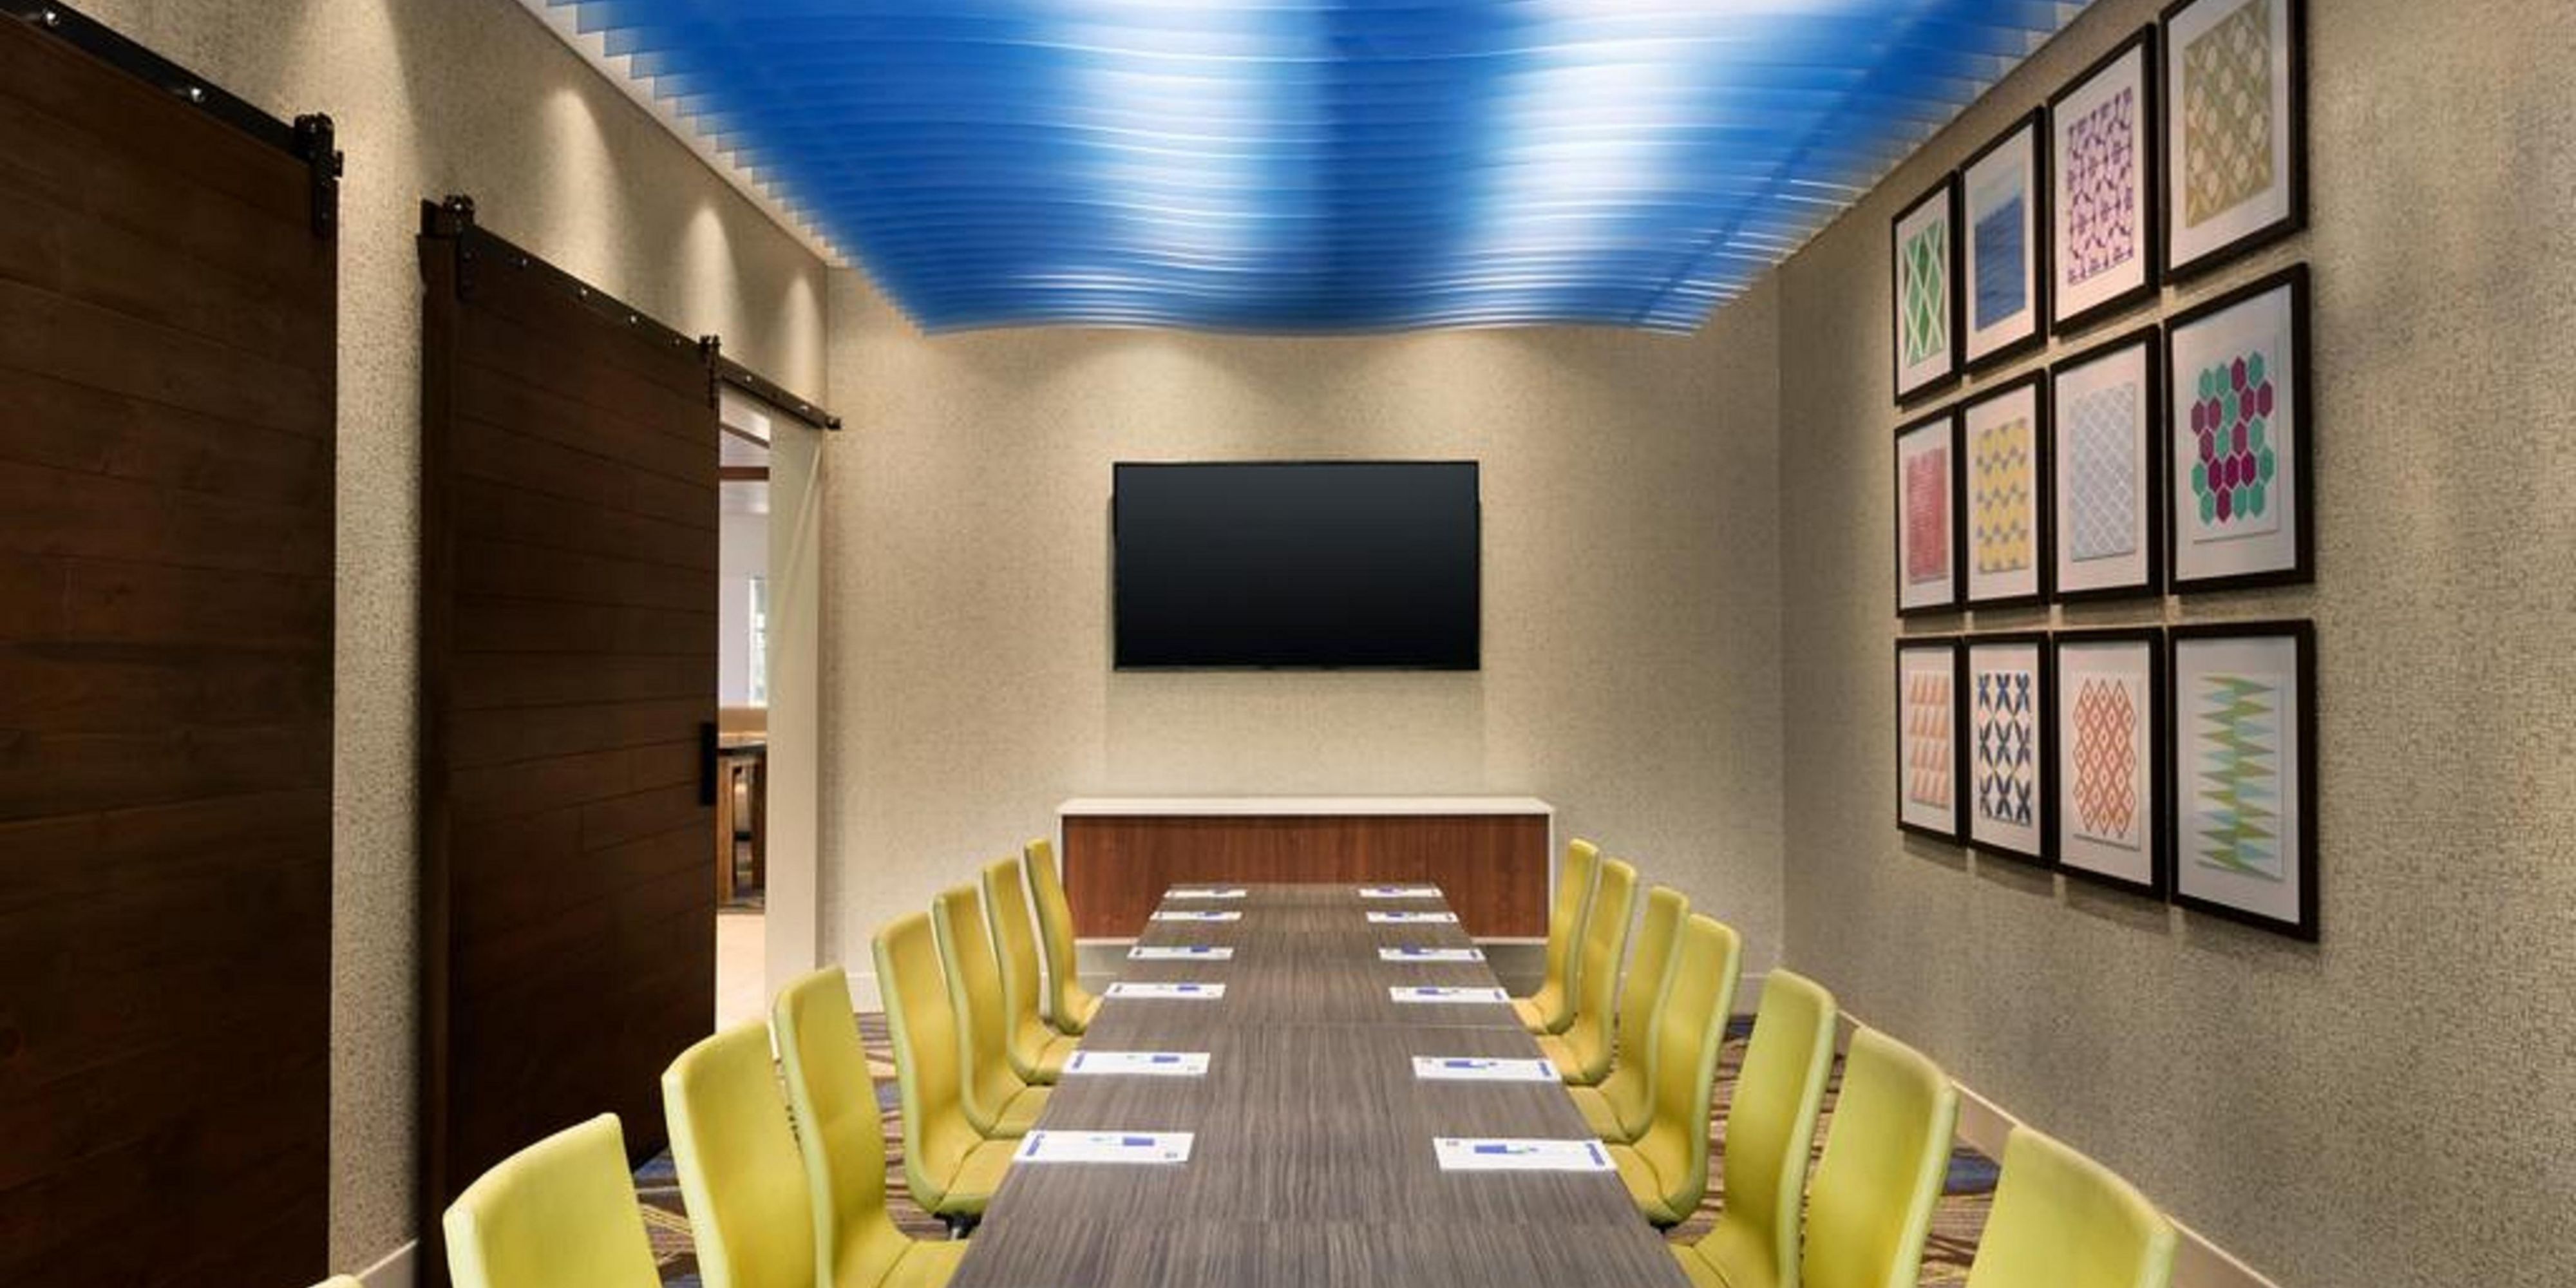 We have a newly renovated meeting room. Our hotel's guests can enjoy a modern, bright and relaxing room. It includes projectors, screen and white board available upon request. You may cater in or bring in your own food.